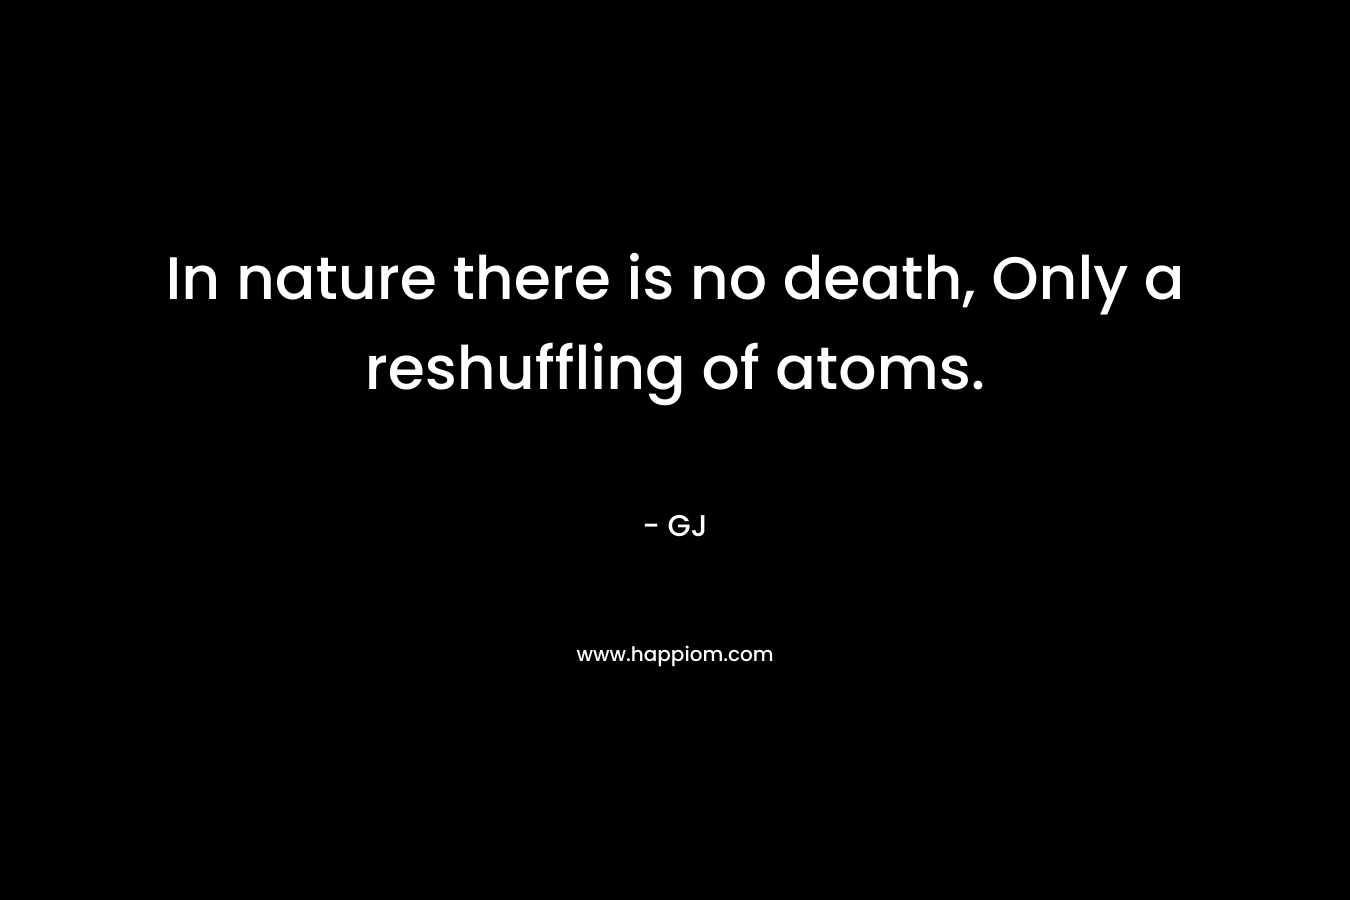 In nature there is no death, Only a reshuffling of atoms.